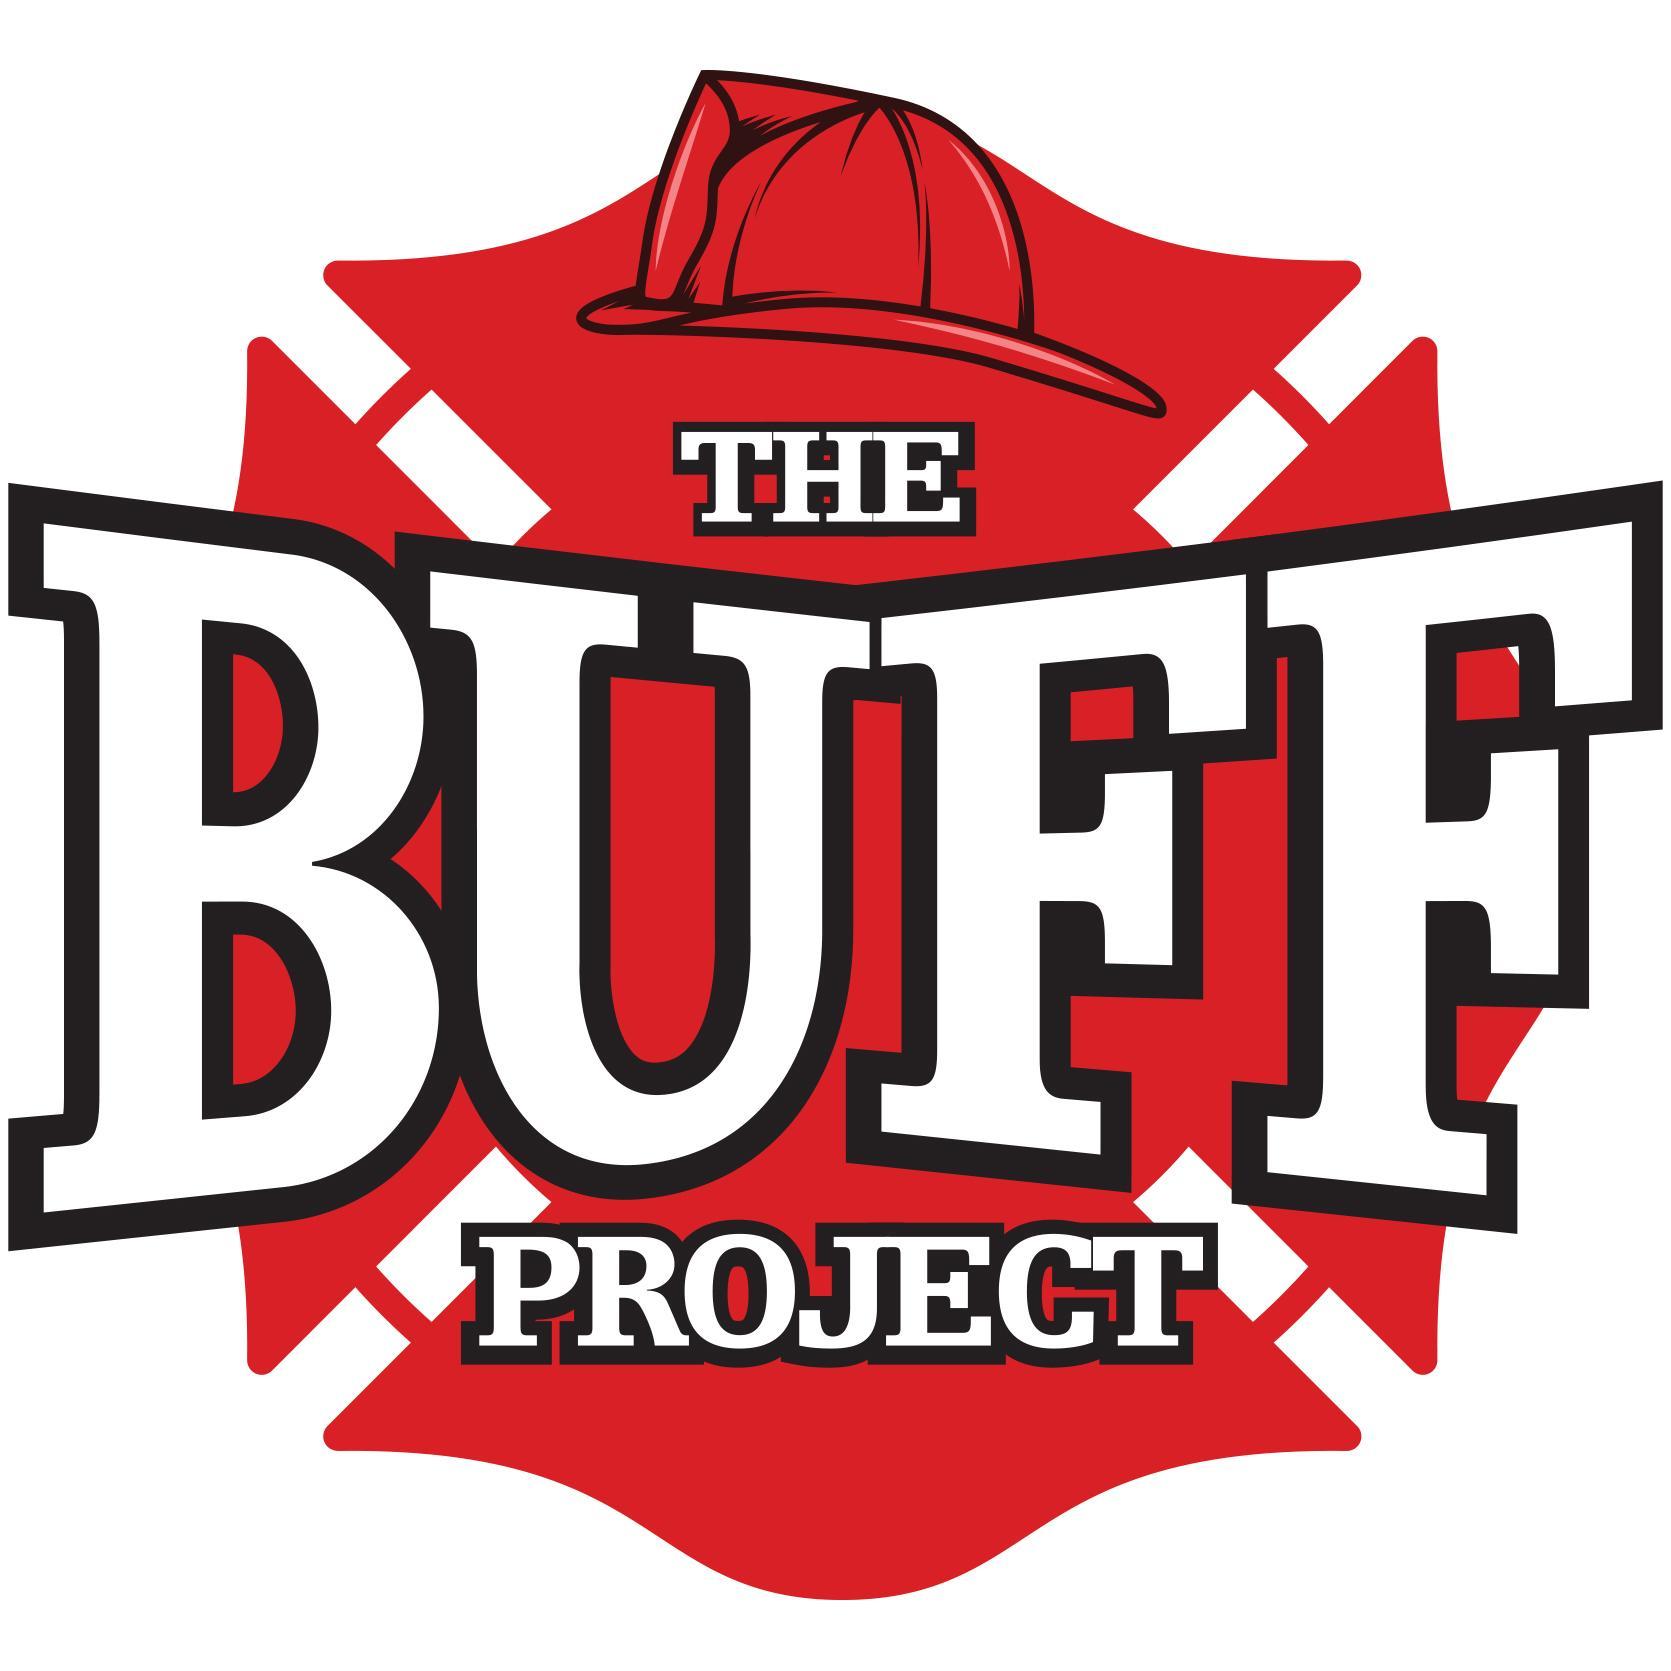 Who said Smoke Alarms can't be cool? 
#thebuffproject was created by a Firefighter in an effort to get more smoke alarms in homes to protect families!